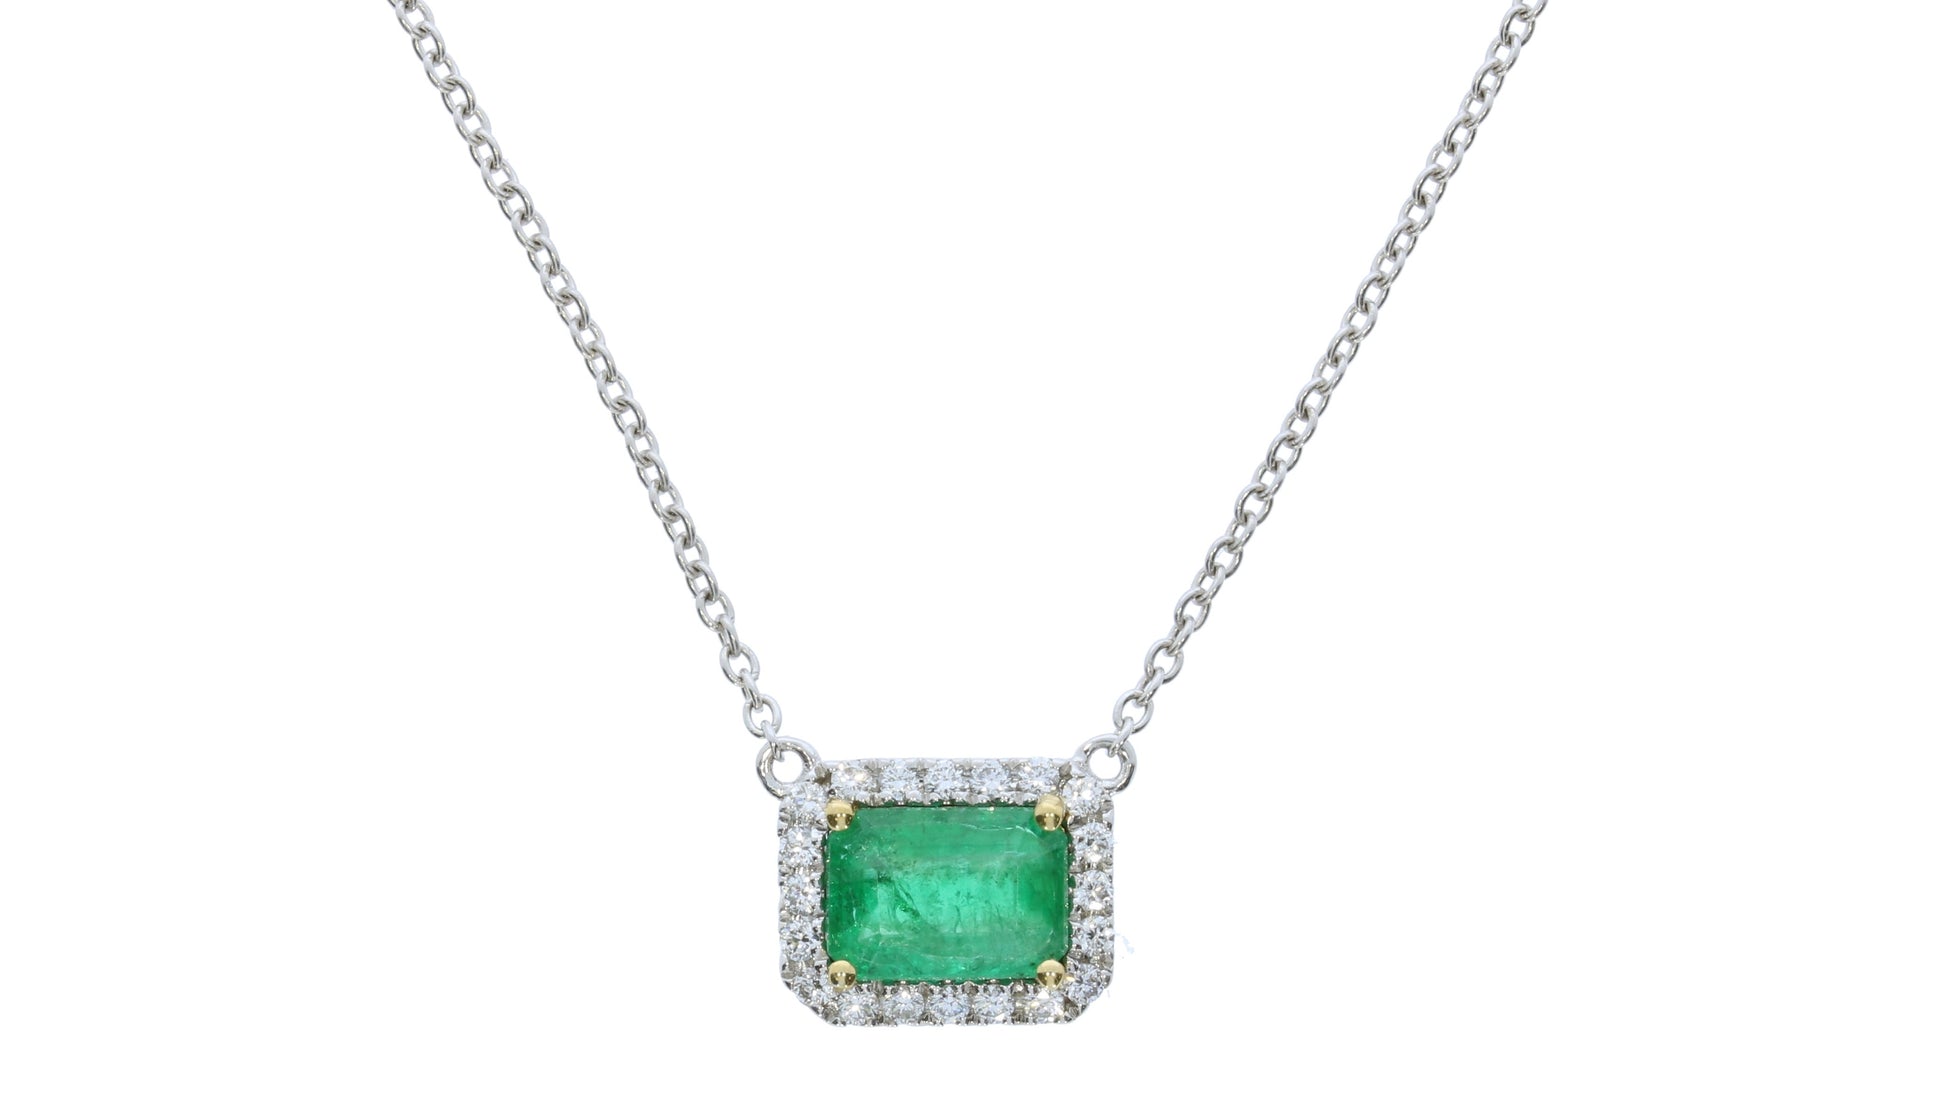 Ladies 18 Karat White and Yellow Gold Emerald Necklace - Colored Stone Necklace